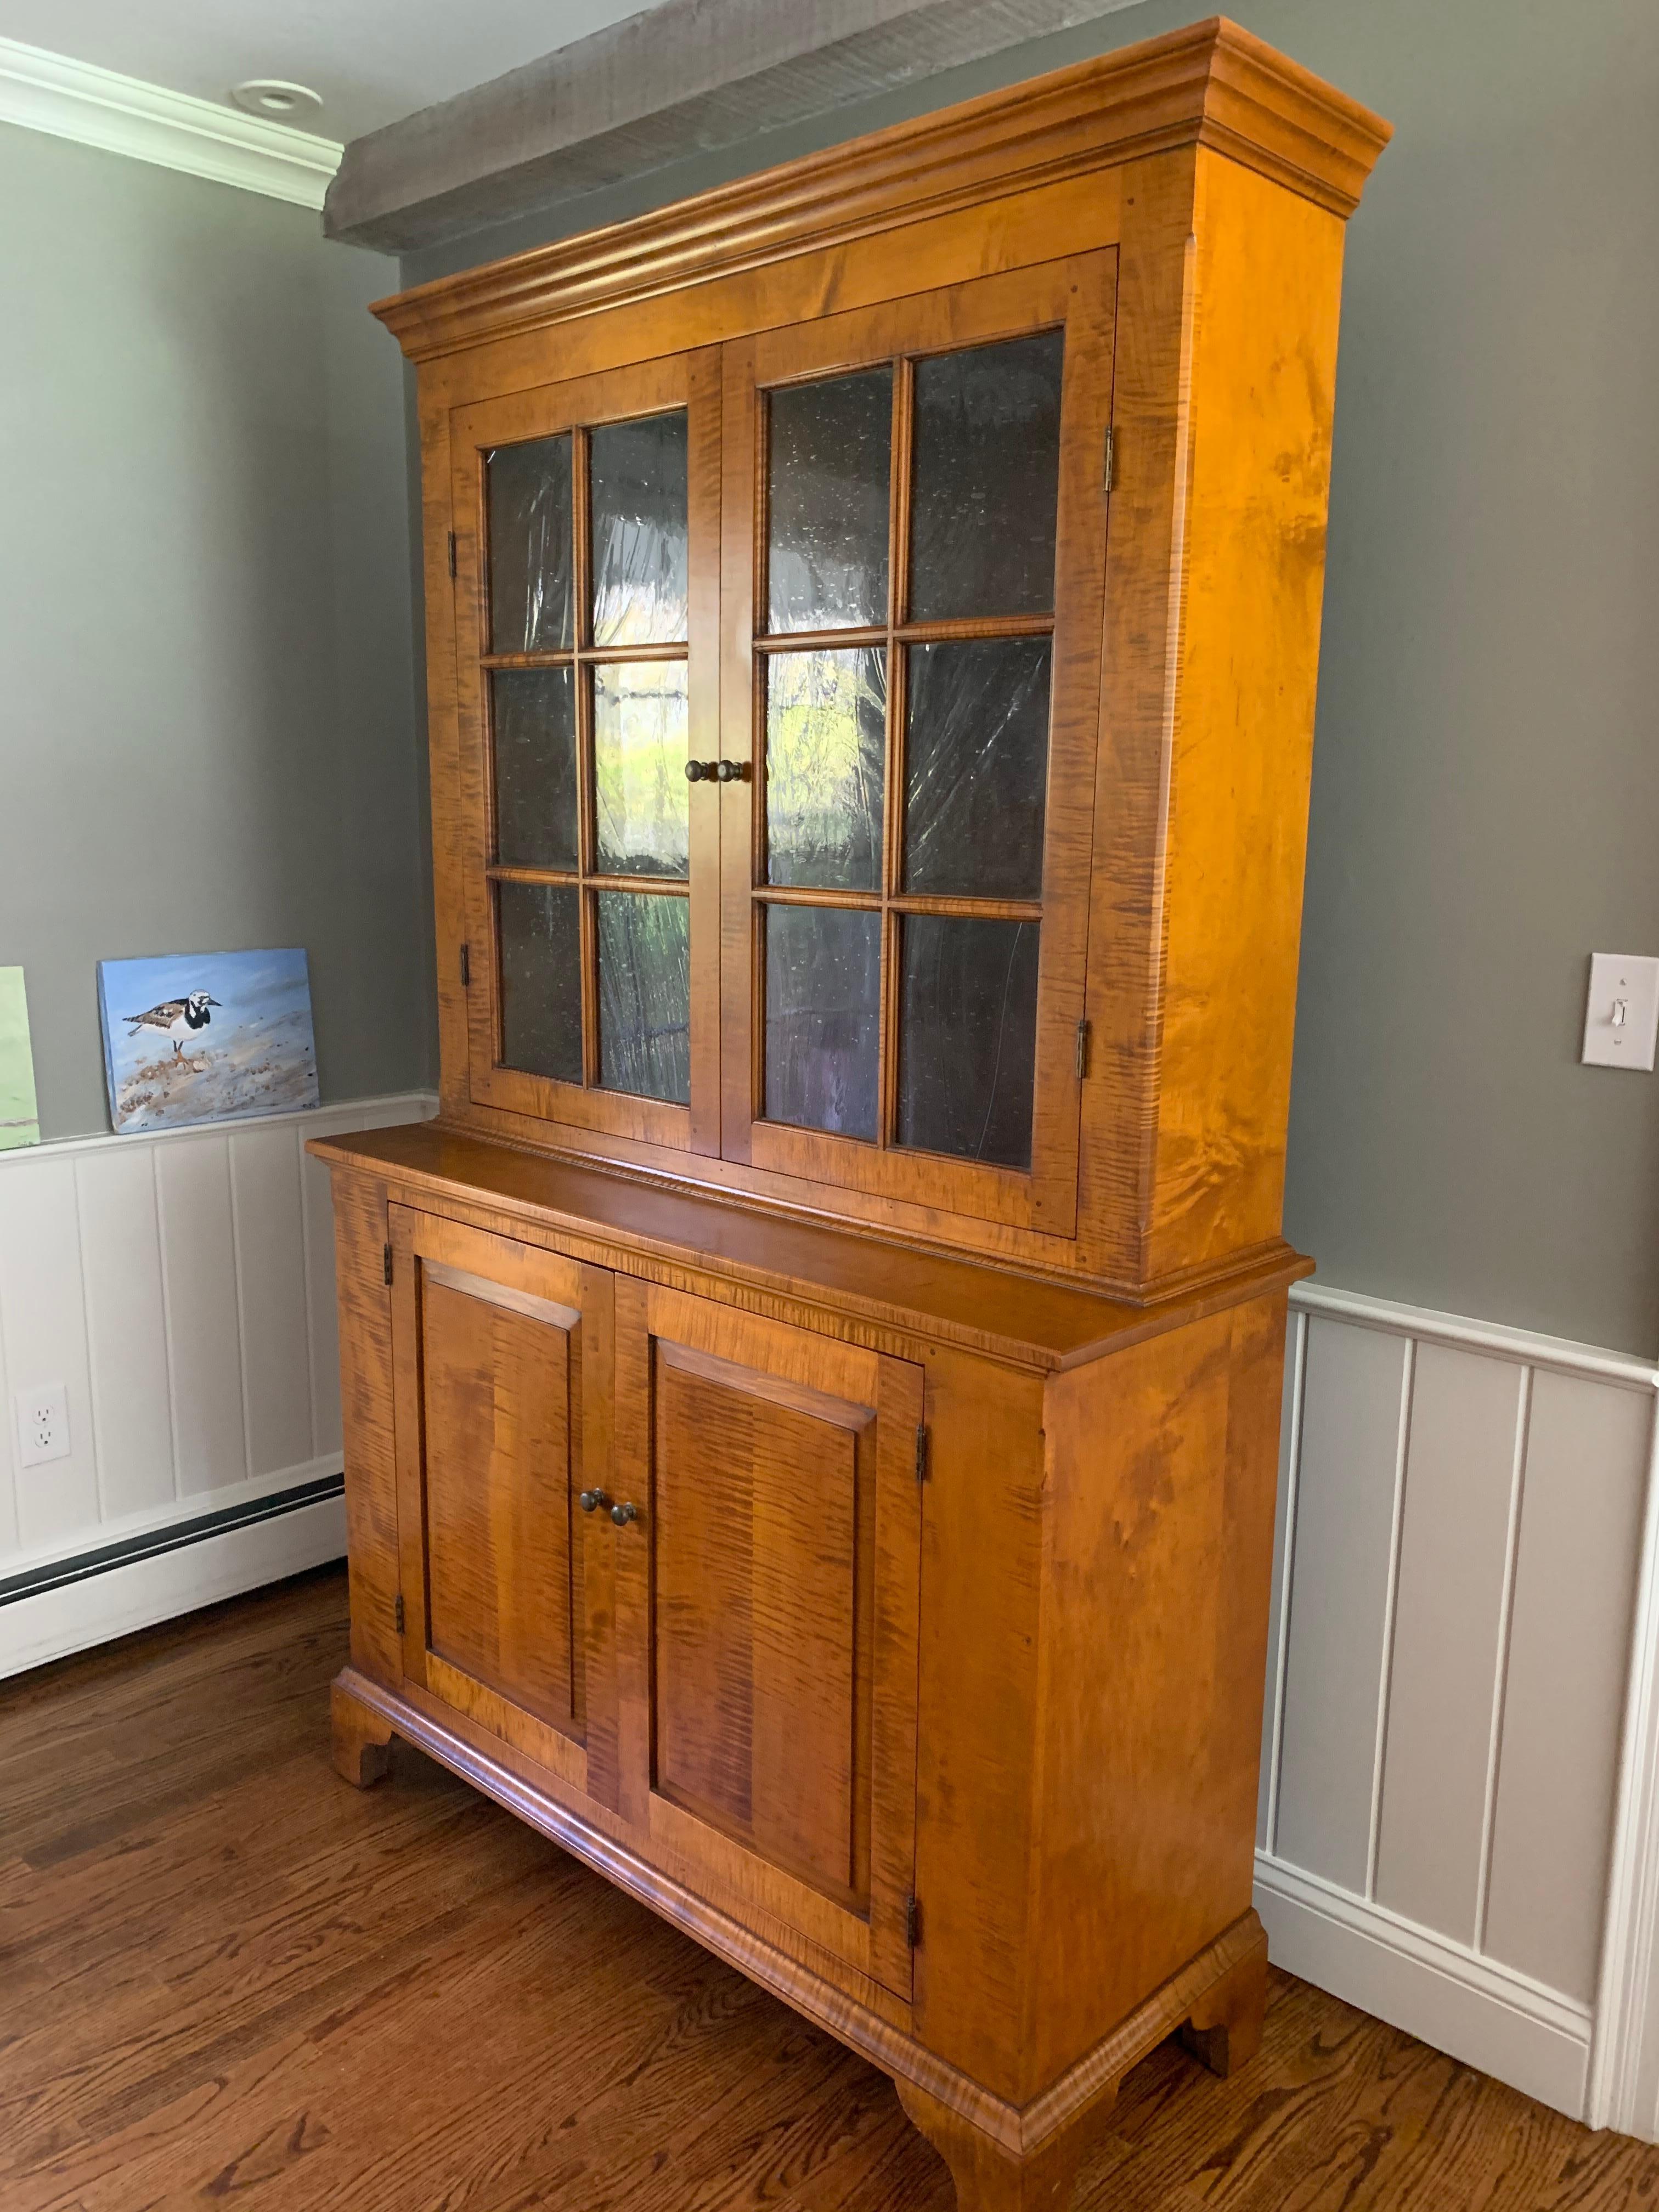 Very handsome solid artisan handmade tiger maple china cabinet have two doors on top with seeded glass, and 2 panel doors on the bottom. Offers lots of storage.
  